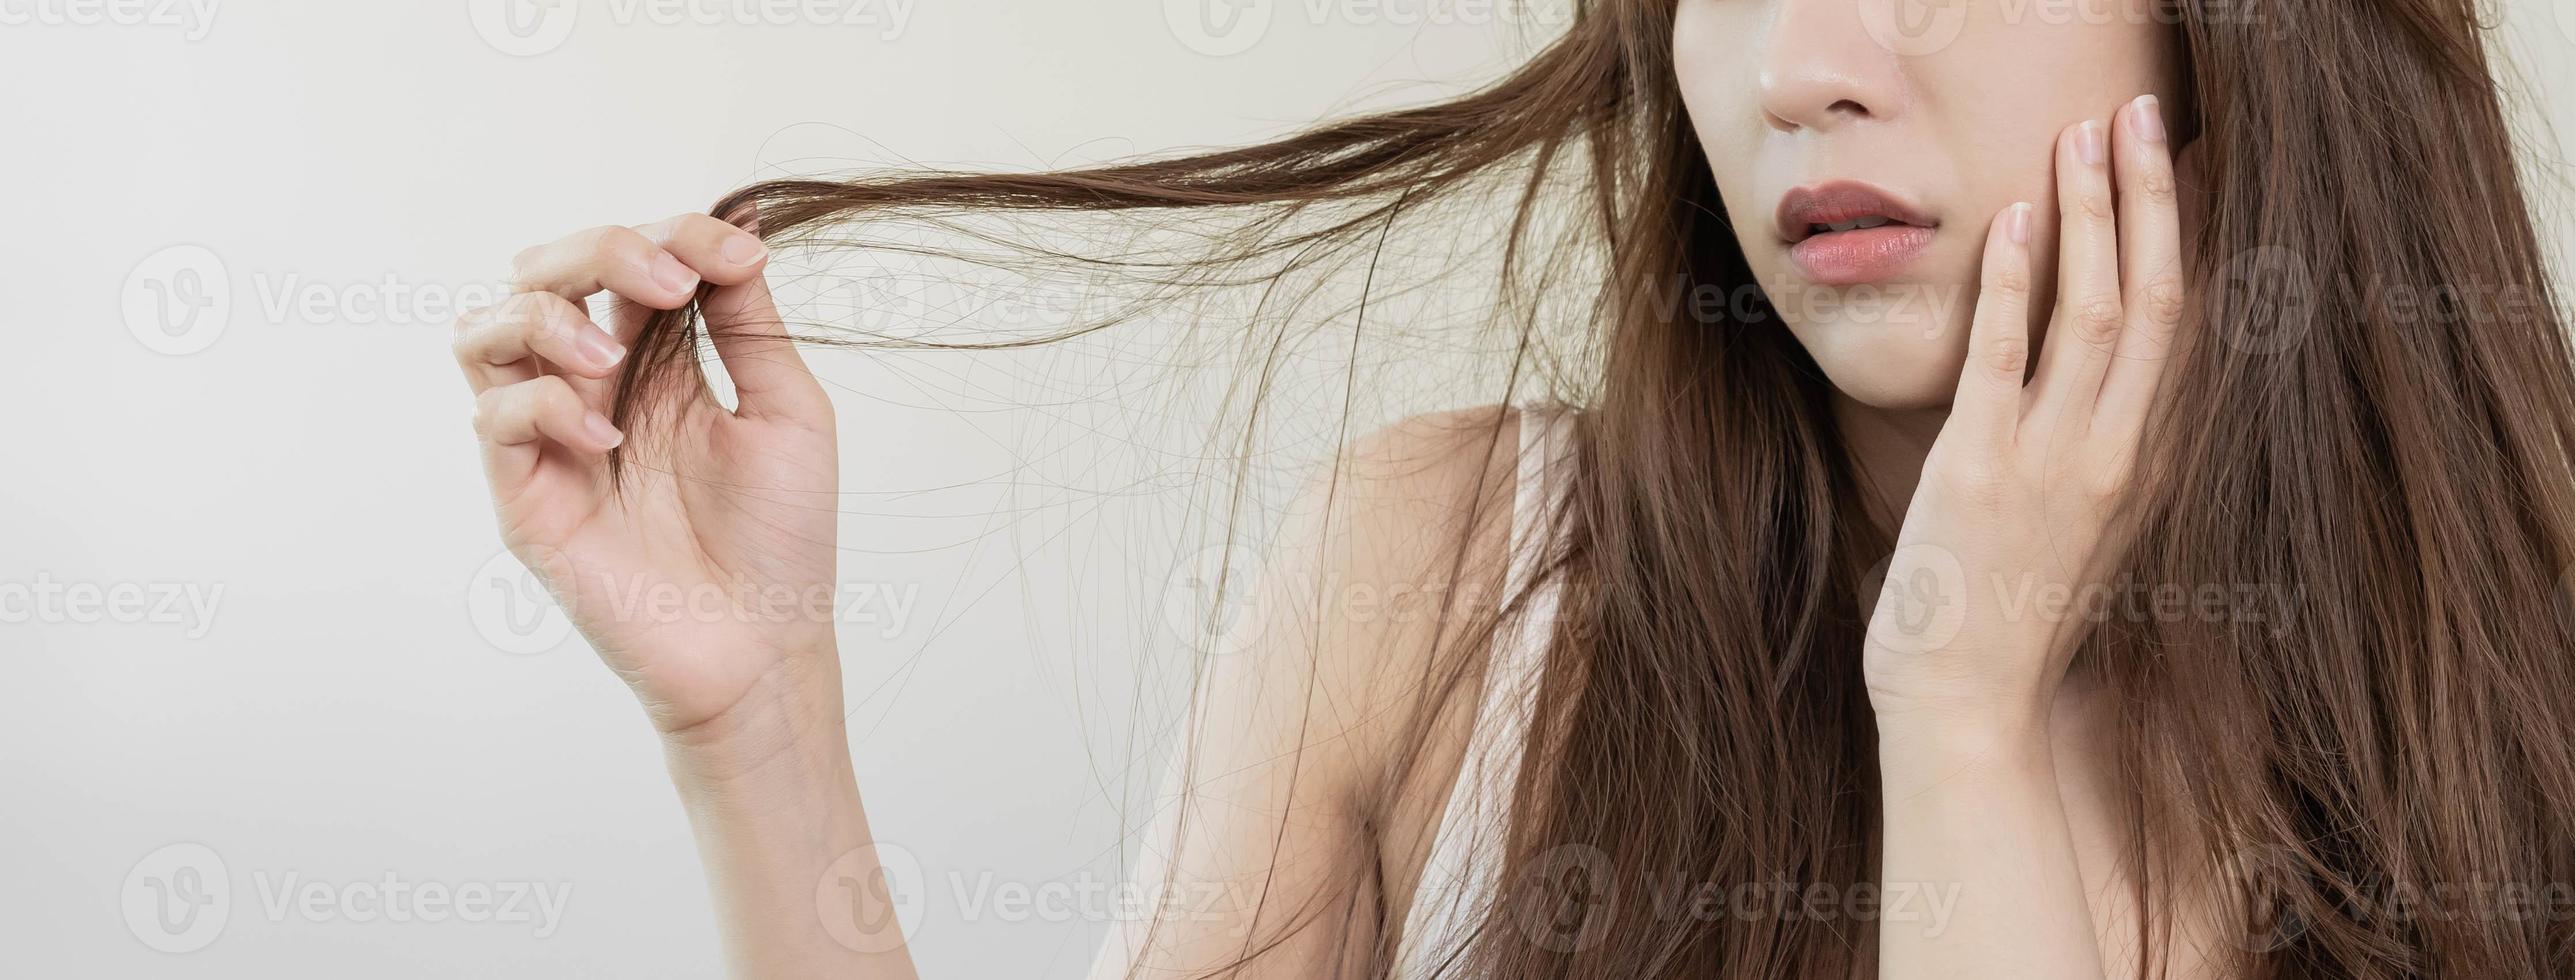 Damaged Hair, frustrated asian young woman, girl hand in holding splitting ends, messy unbrushed dry hair with face shock, long disheveled hair, health care of beauty. Portrait isolated on background. photo